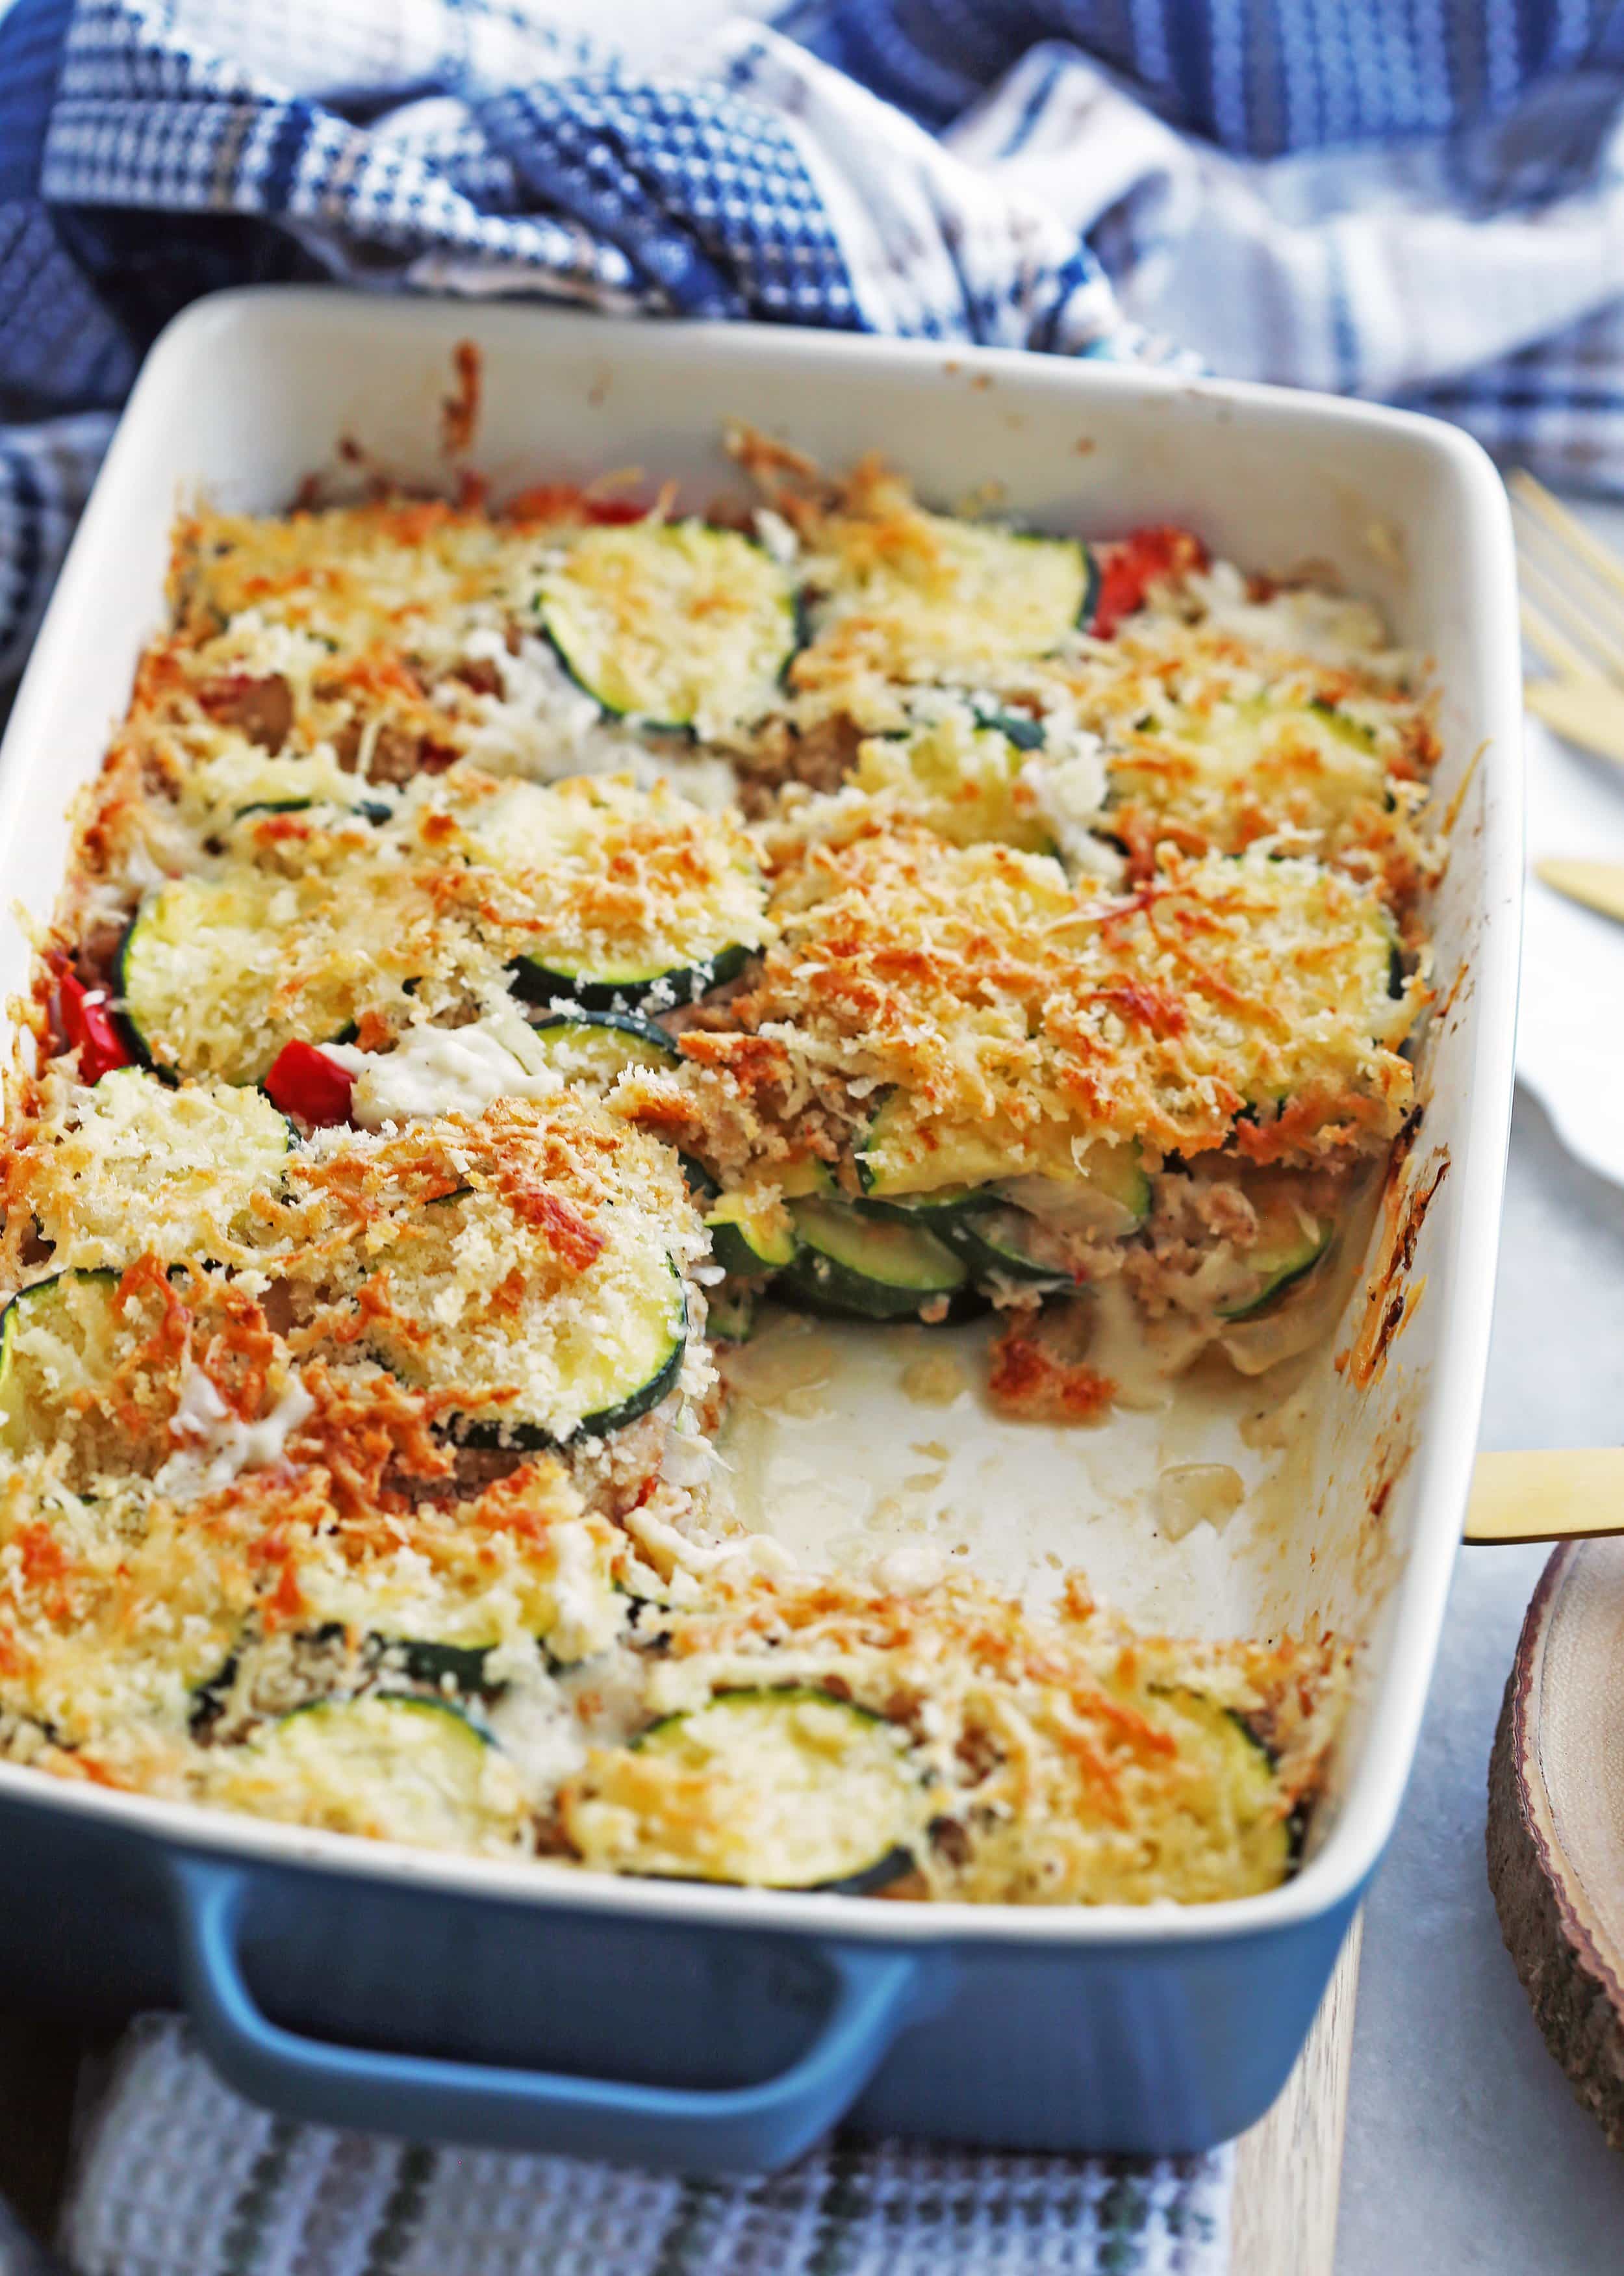 Zucchini Gratin with Gruyère and Panko Breadcrumbs in a blue rectangular casserole dish with one piece of gratin removed.